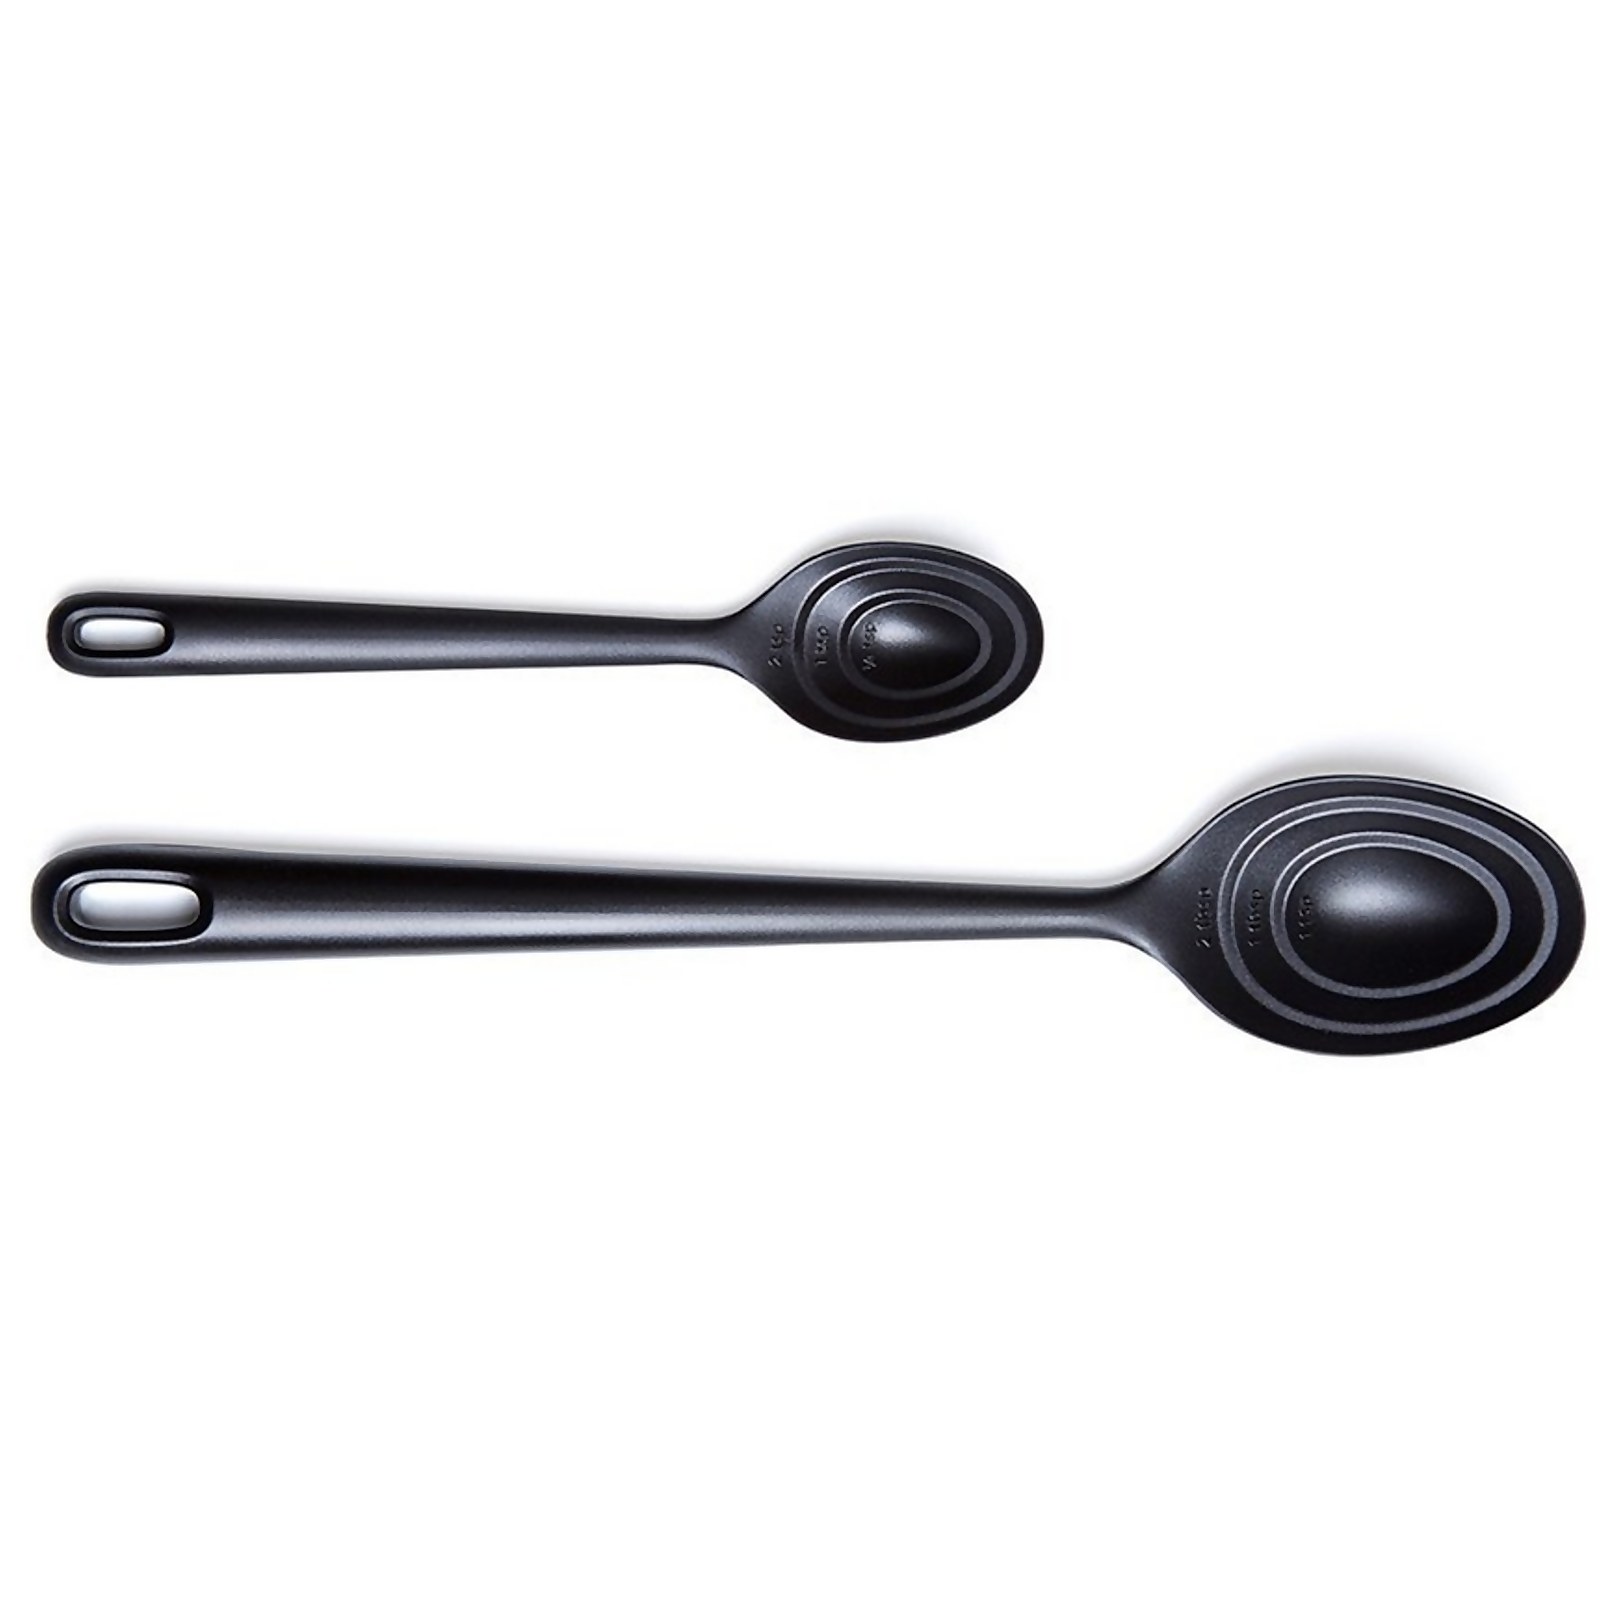 Quirky Portion Mixing and Measurement Baking Spoon - Black (Pack of 2)